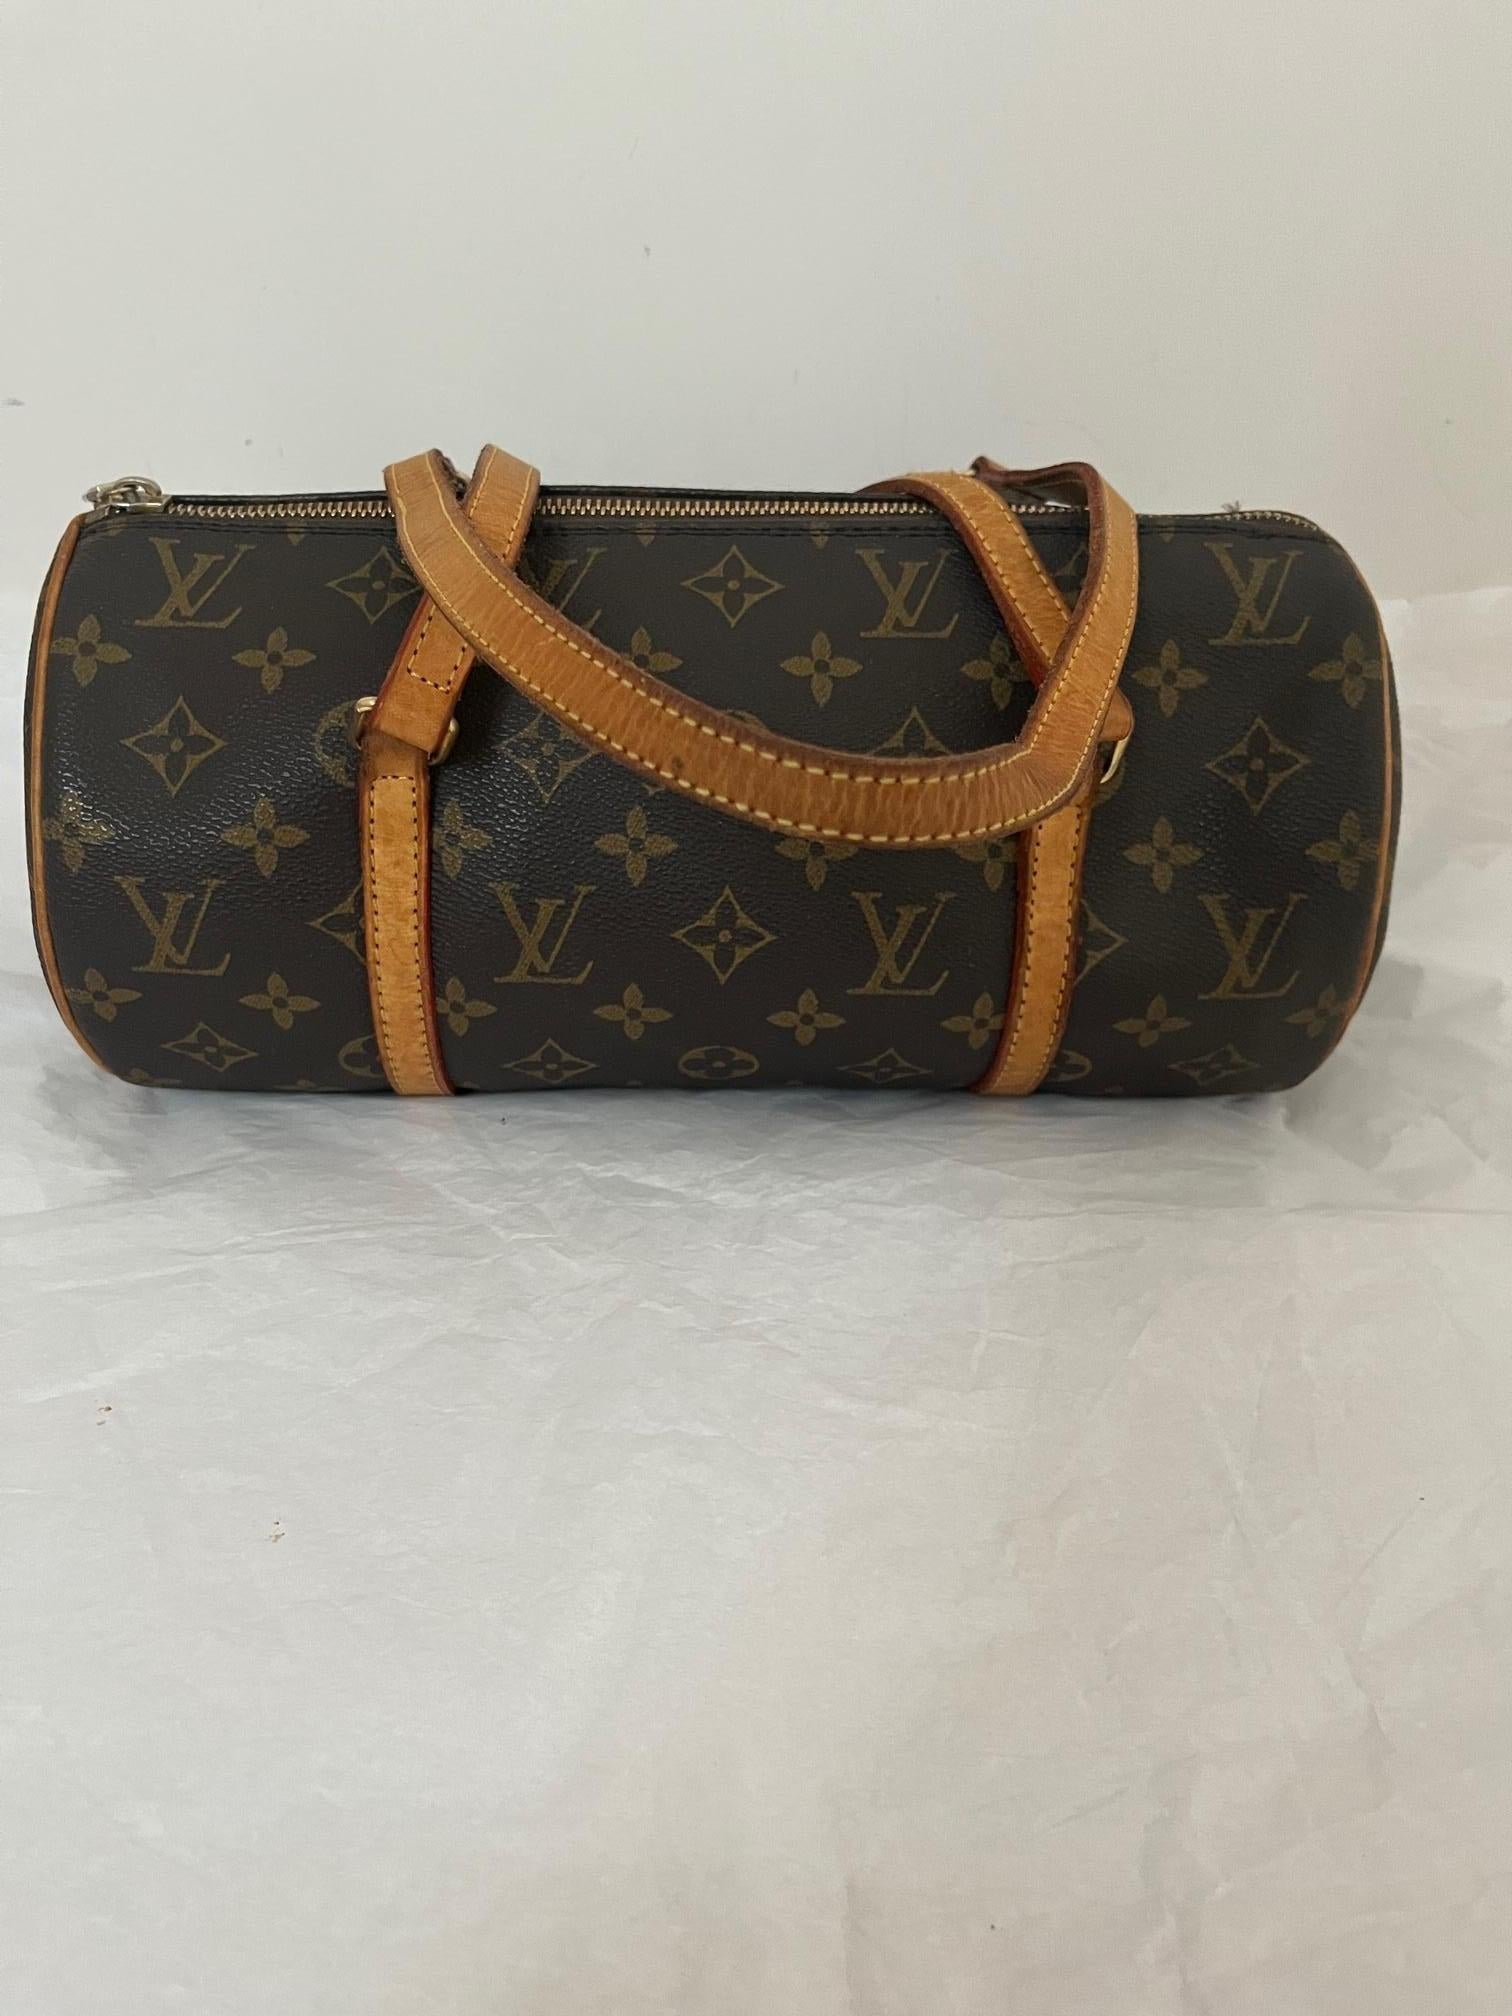 This Louis Vuitton Papillon hand/shoulder bag is in very good vintage condition and comes with a Certificate of Authentication. The bag is made of brown monogram canvas with leather trim, and has a top zip closure.
Both the inside and outside are in